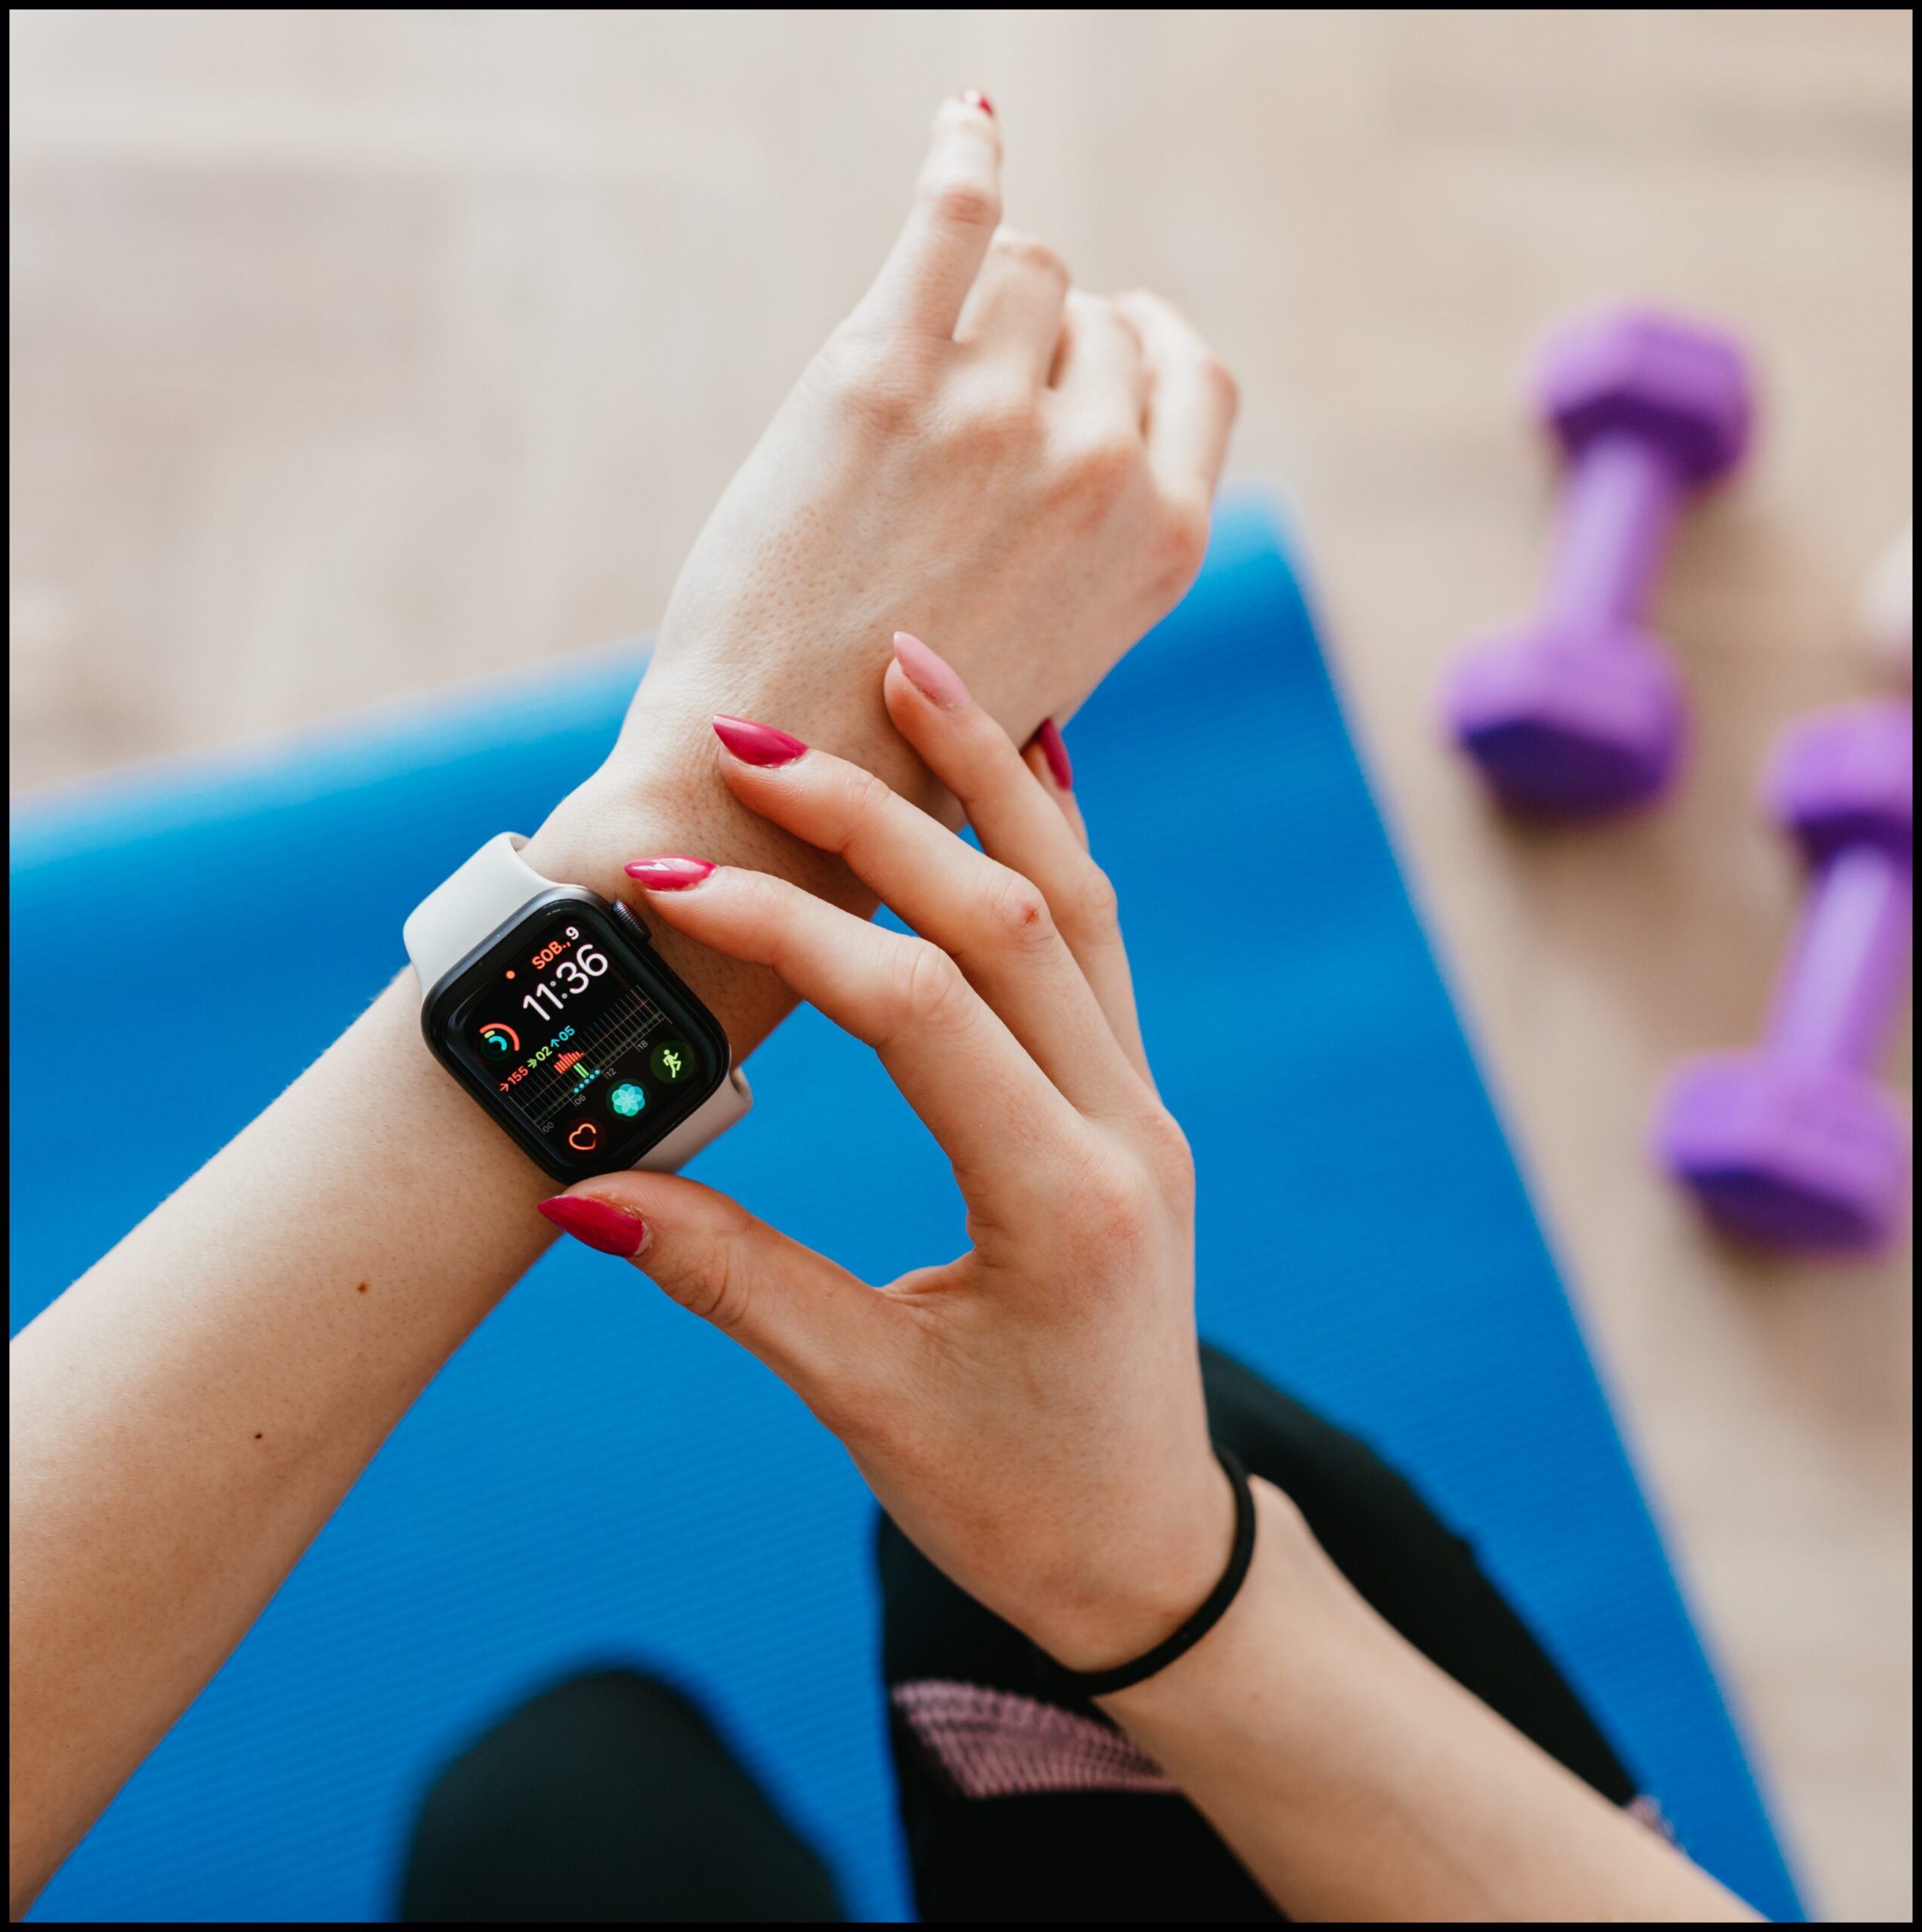 Beyond the Hype: The Reality of Wearable Health Devices